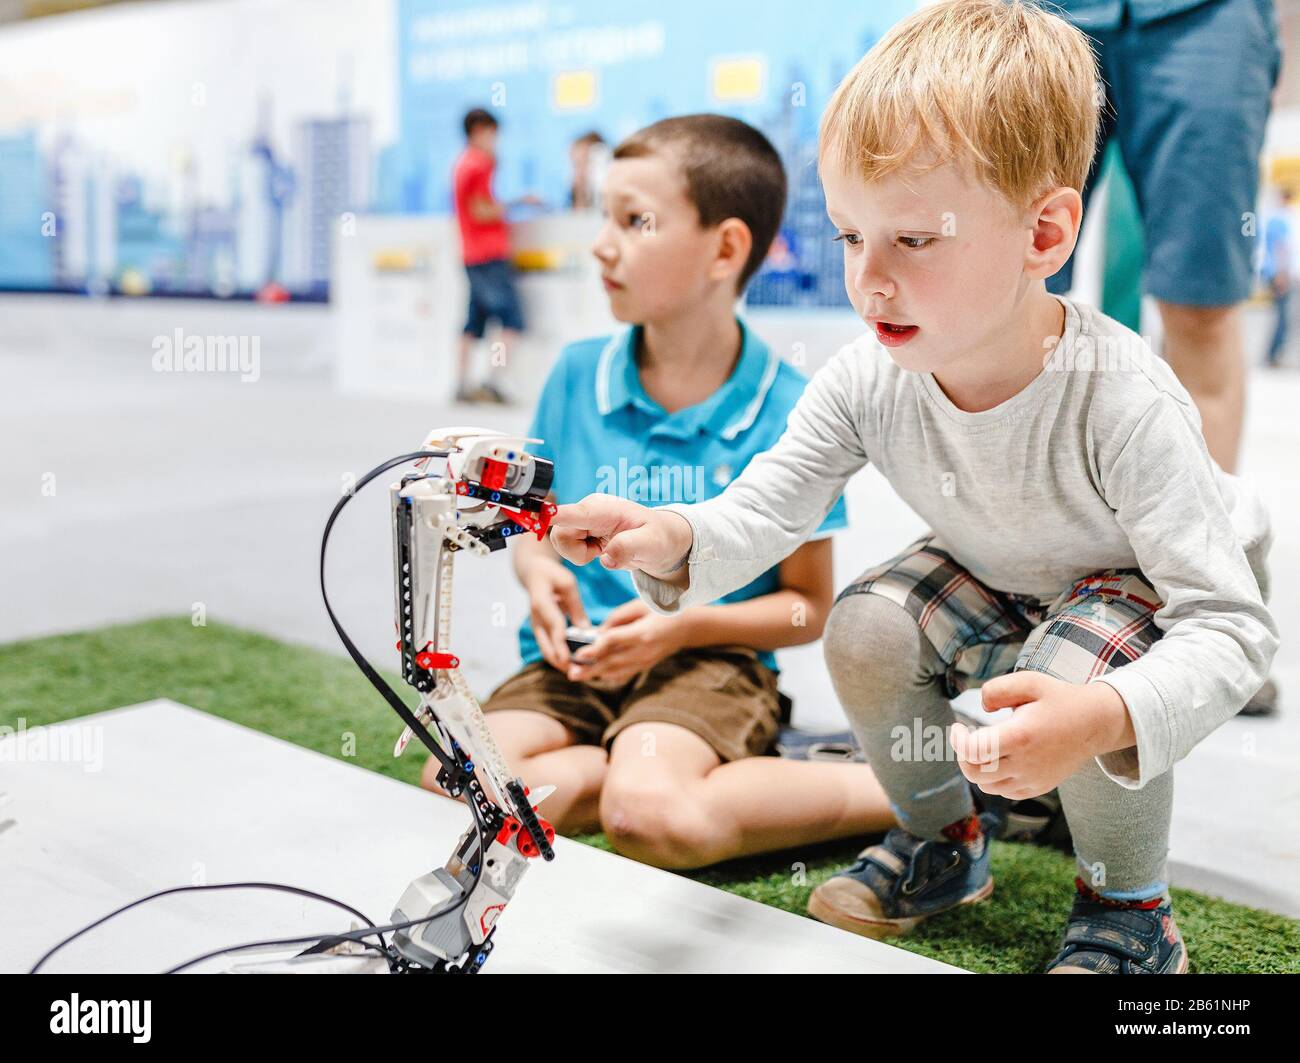 ULTRA MALL, UFA, RUSSIA, 21 AUGUST, 2017: Kid boy playing with interactive robot toy at the exhibition Stock Photo